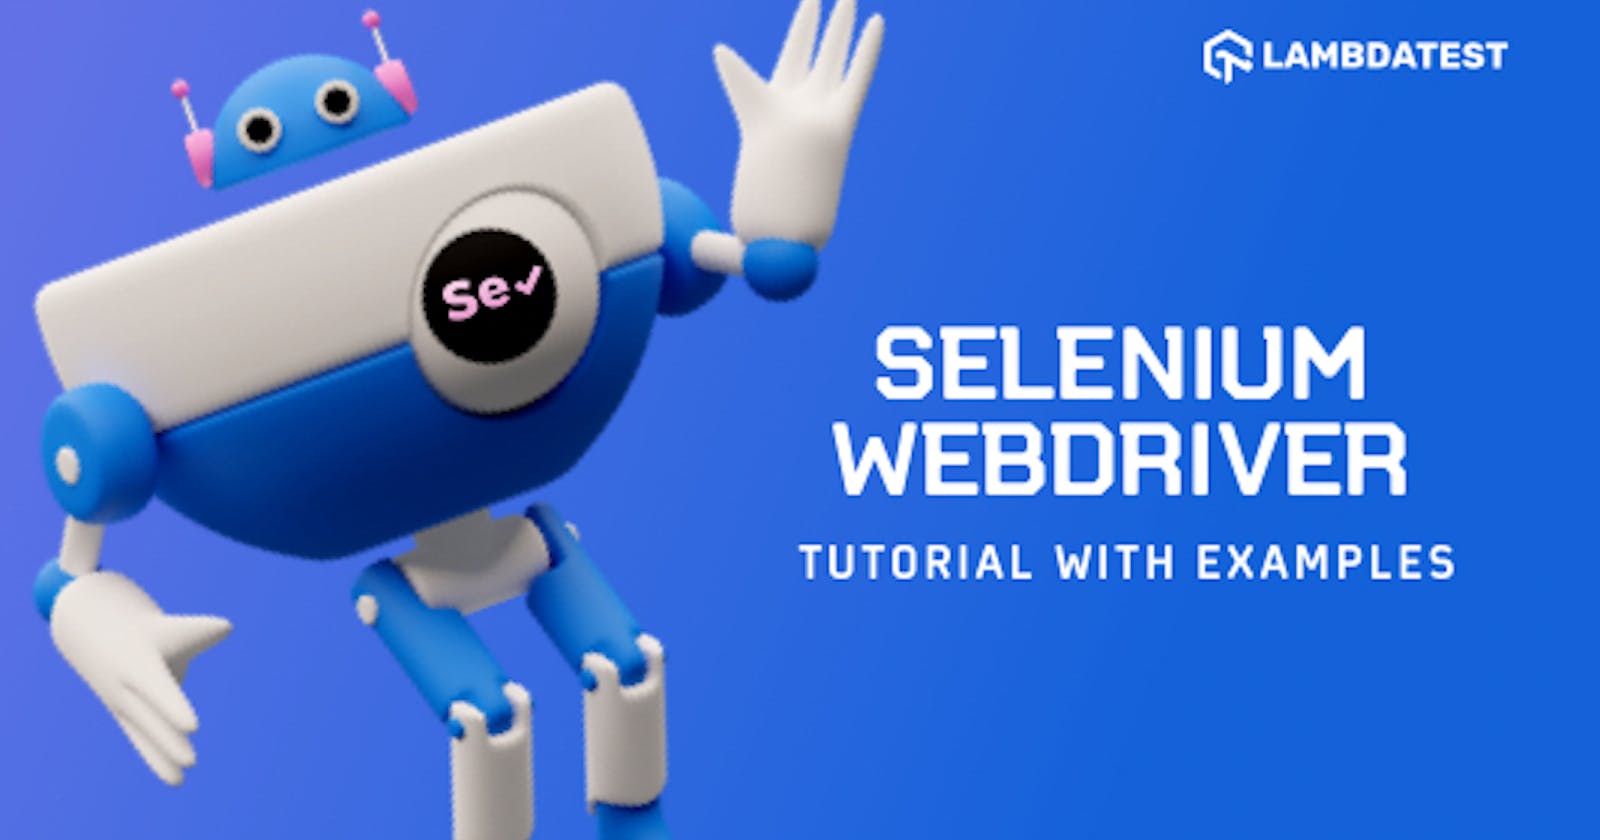 Guide To Selenium WebDriver: Getting Started With Test Automation [Tutorial]